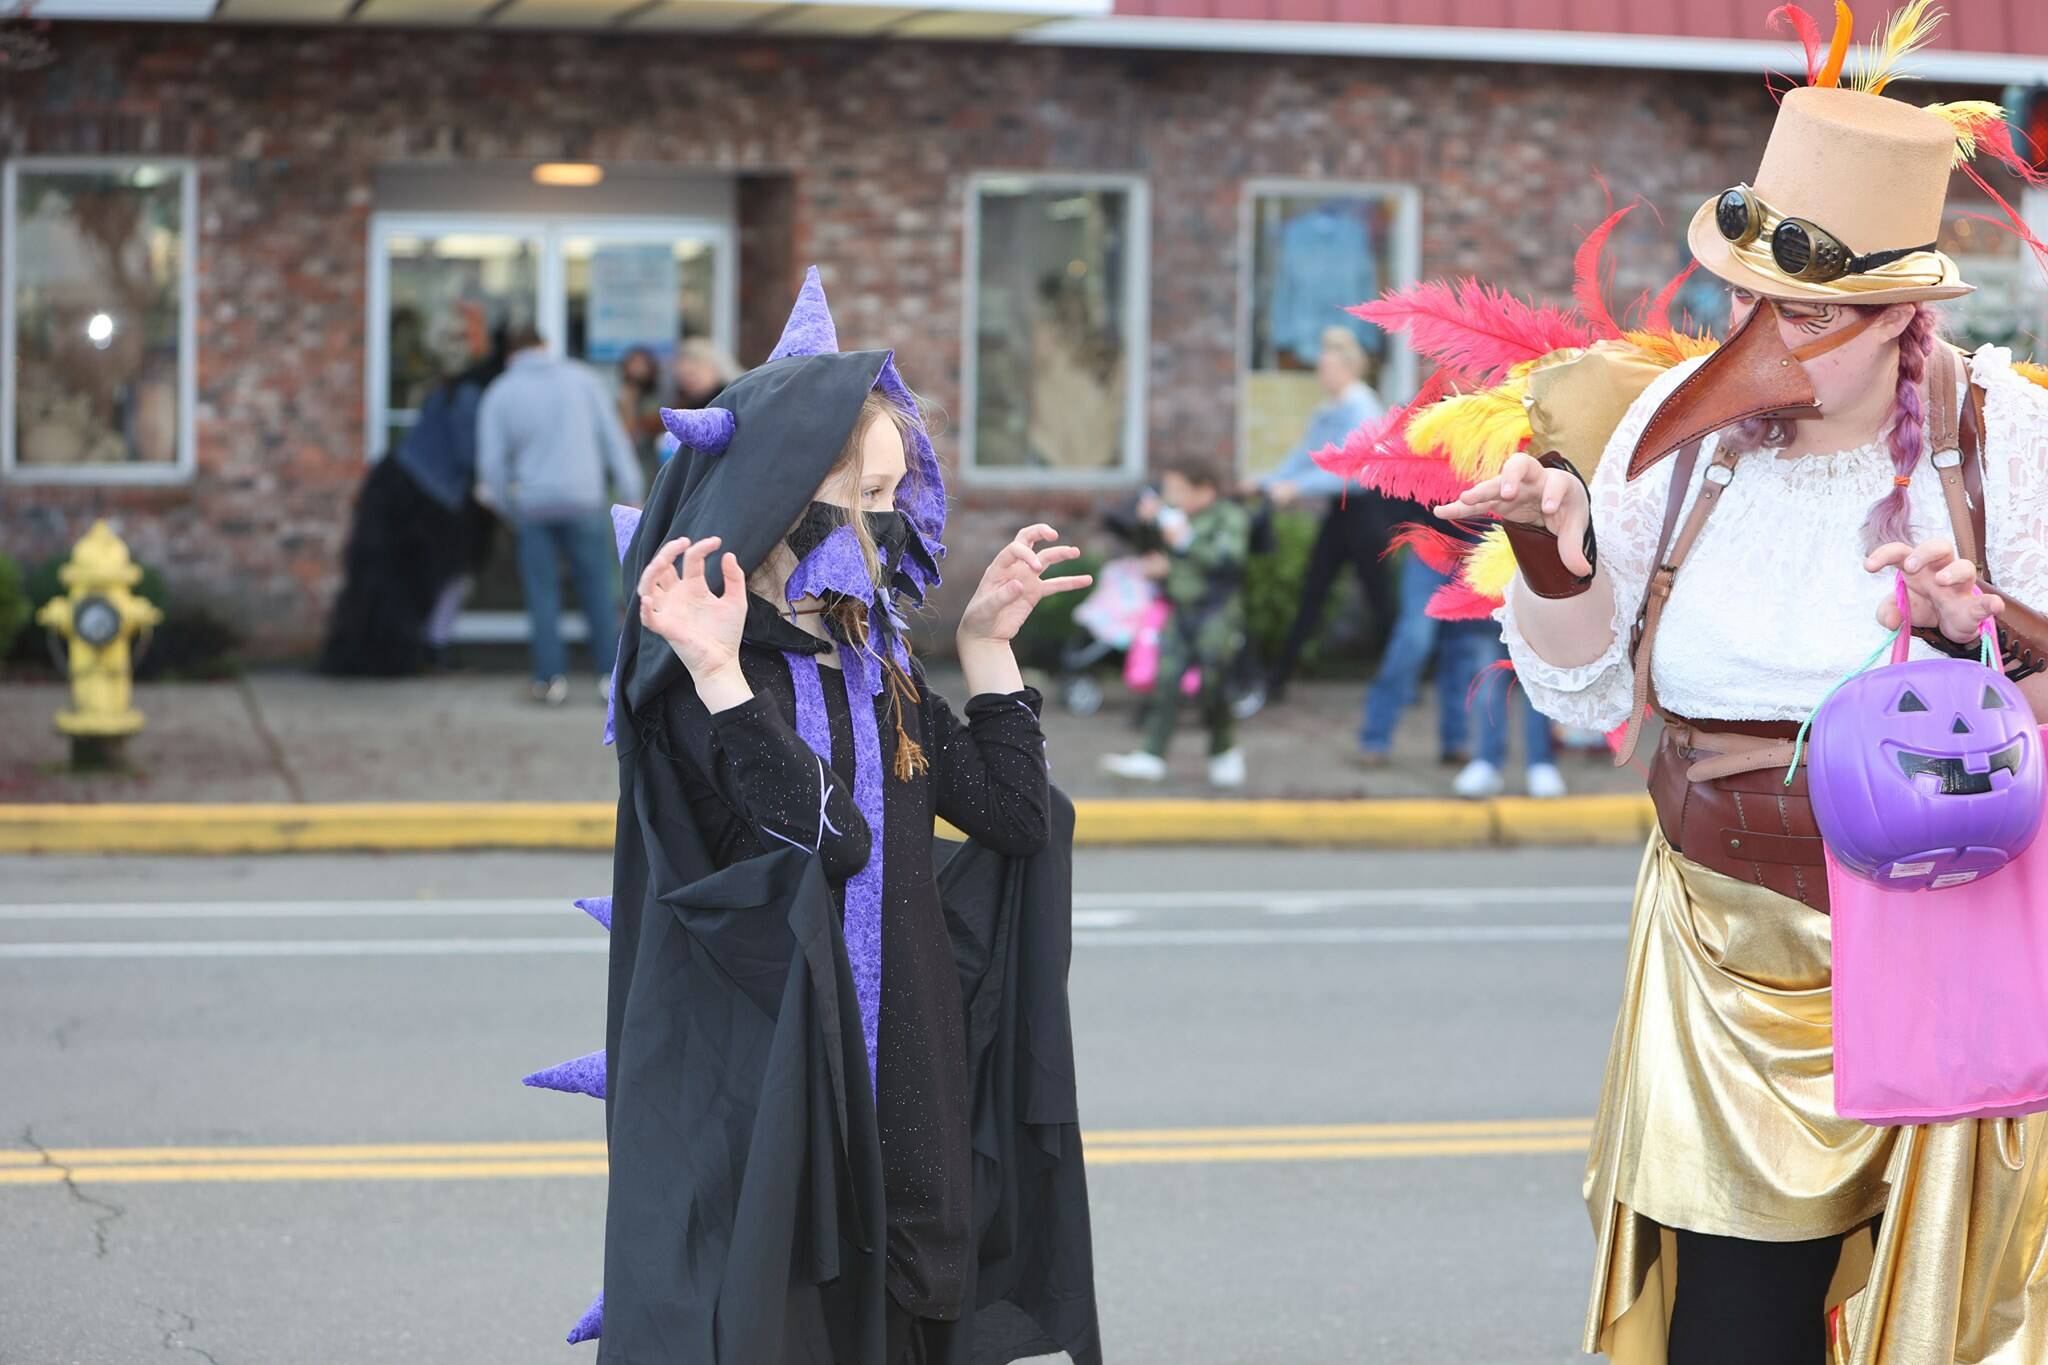 The Children’s Costume Contest will be one of the multiple events prepared for people who attend the Elma Fall Festival on Halloween, in Elma. Winners will be picked from a variety of themes as well as age category if enough participants join.